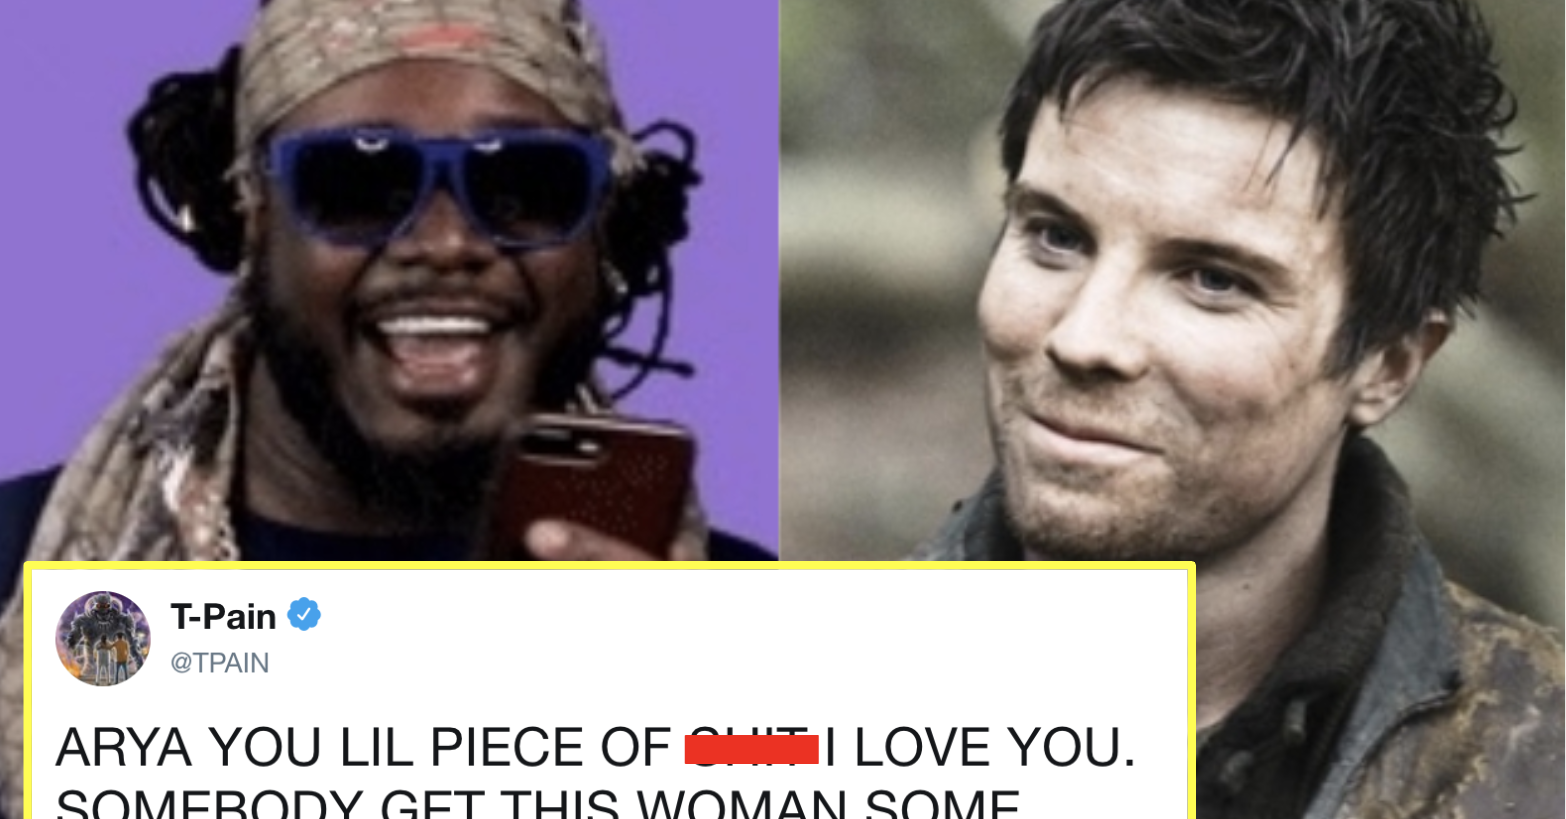 Game Of Thrones Actor Joe Dempsie And T Pain Just Had The Best